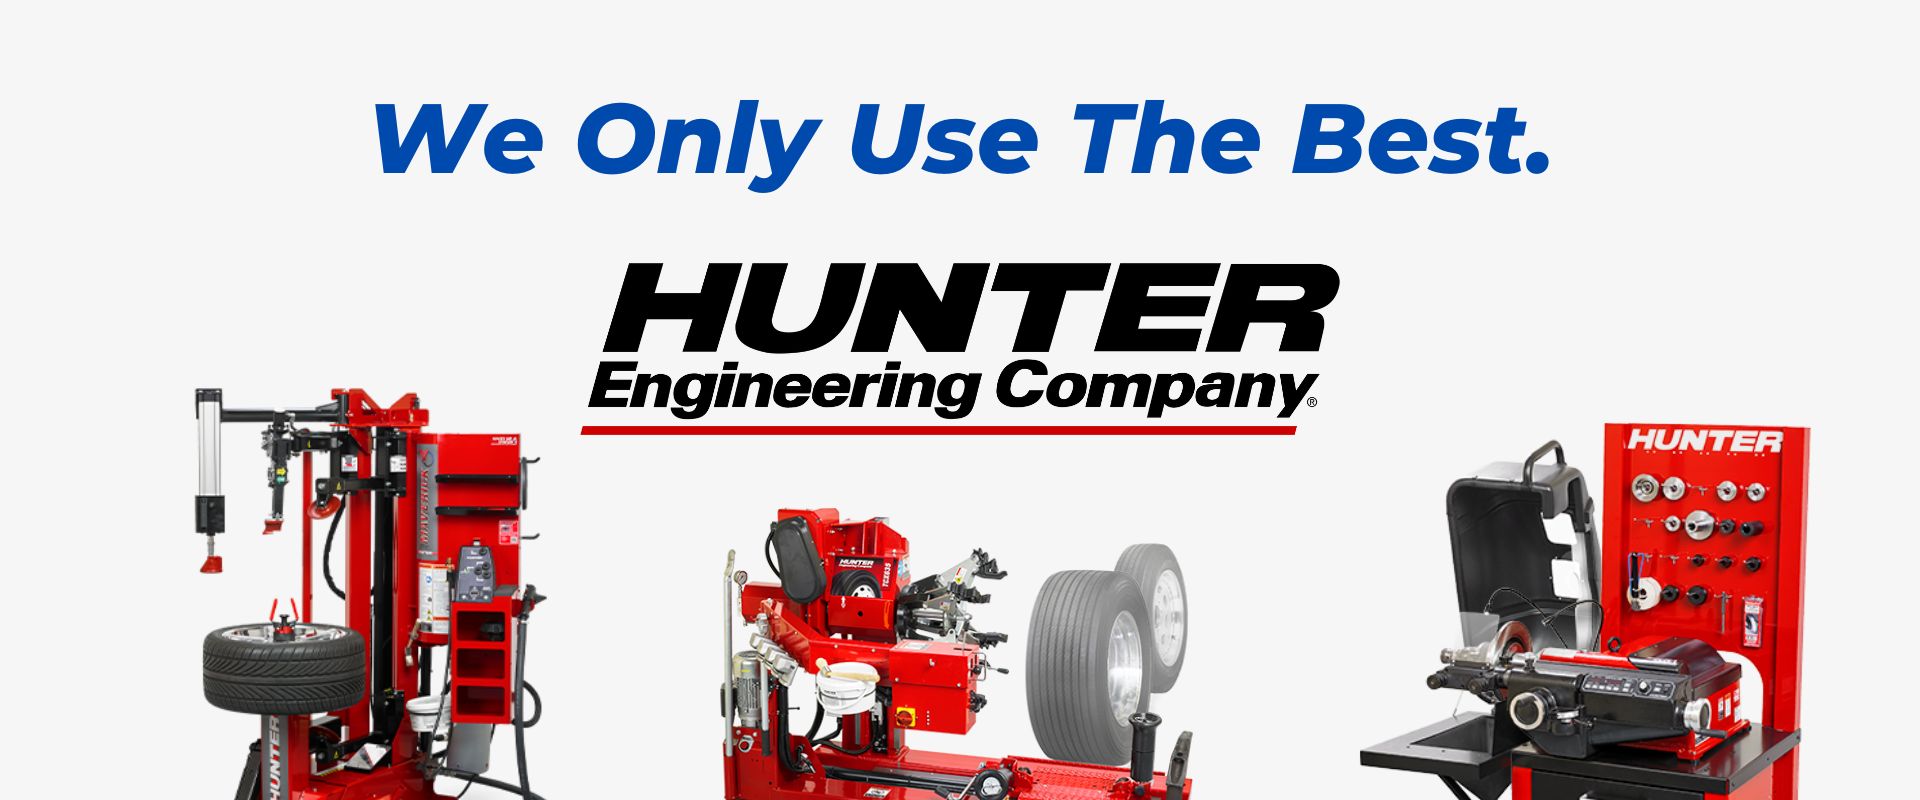 Tire's Home proudly only uses the highest quality equipment.